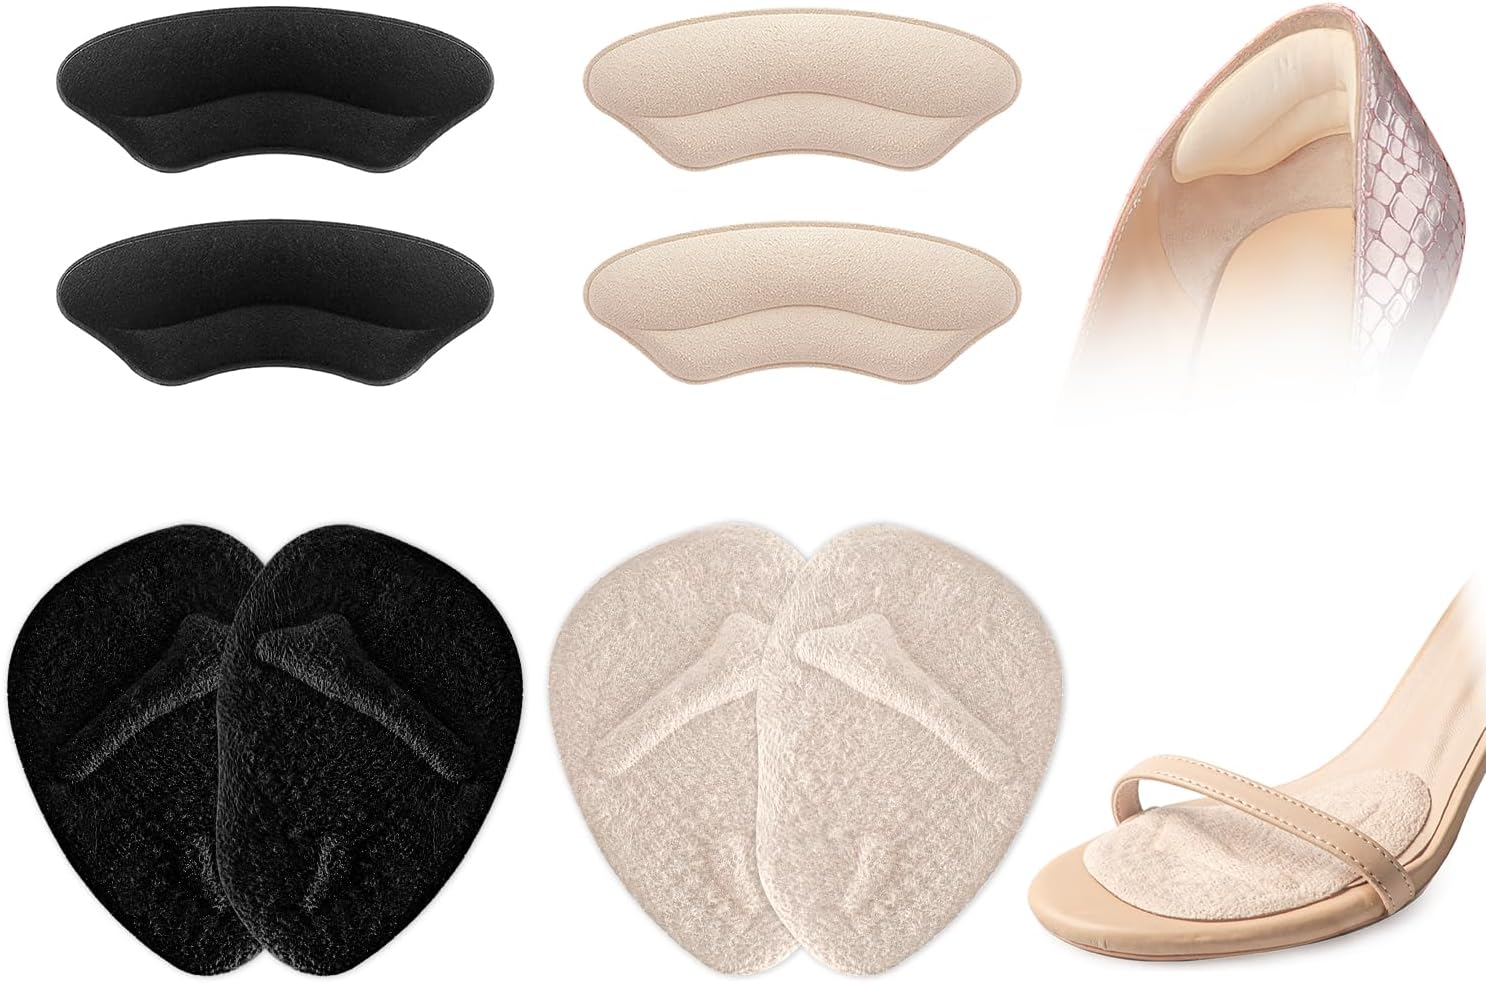 Metatarsal Pads Women, Heel Inserts for Women All Day Reduce Foot Pain, for Stop Feet from Sliding Forward Shoe Inserts for Women for Too Big Shoe (Pale Apricot Black)